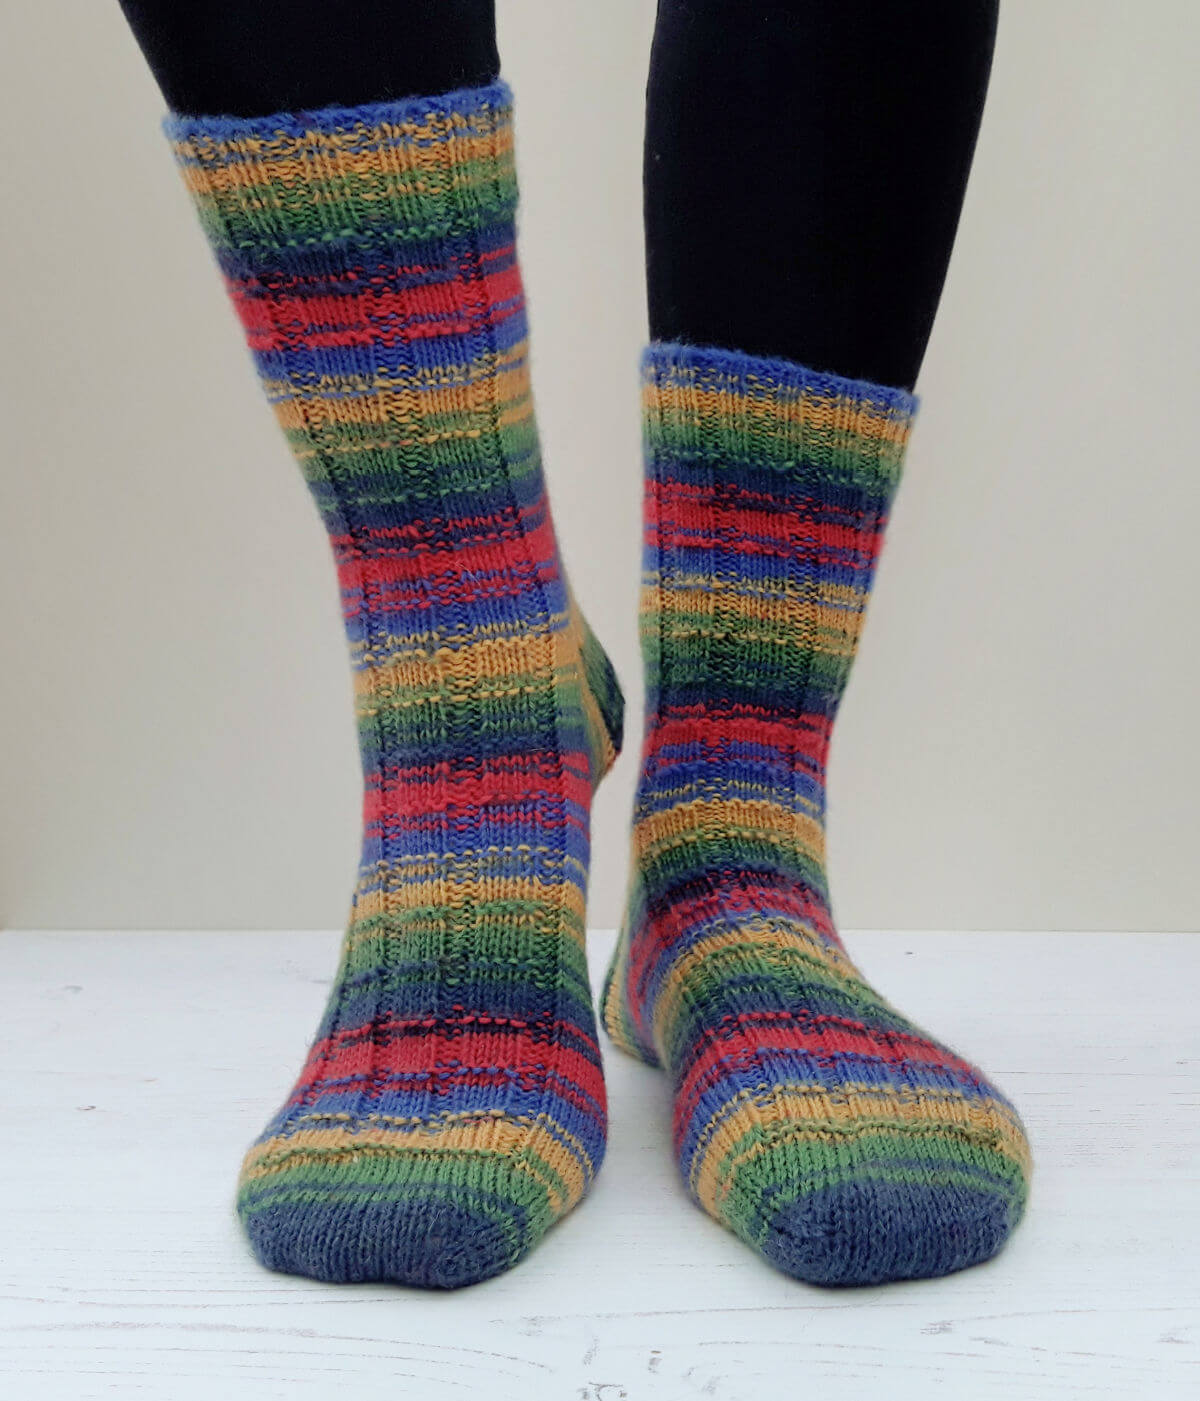 A pair of blue, green, yellow and red socks modelled against a cream background. One heel is slightly raised.